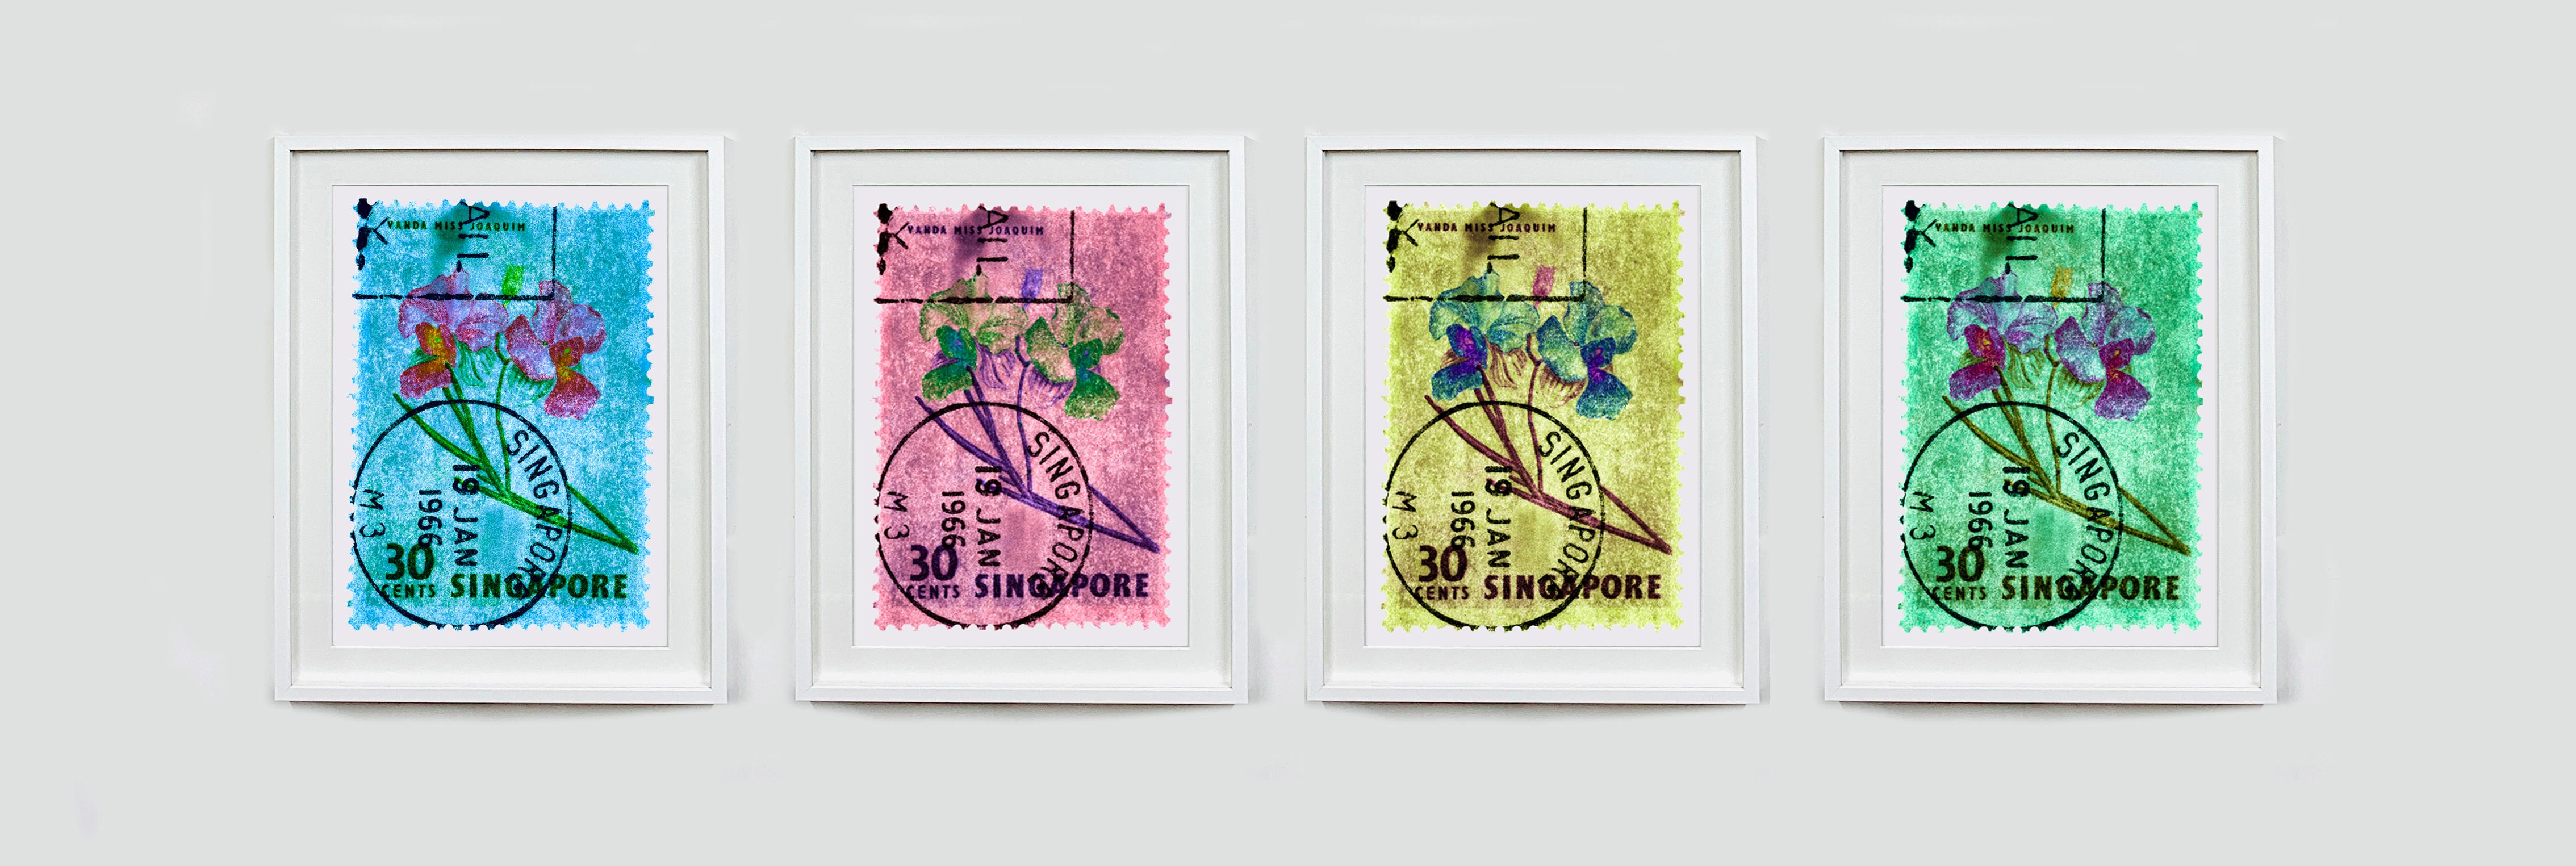 Singapore Stamp Collection, 30c Singapore Orchid Pink - Floral color photo For Sale 1